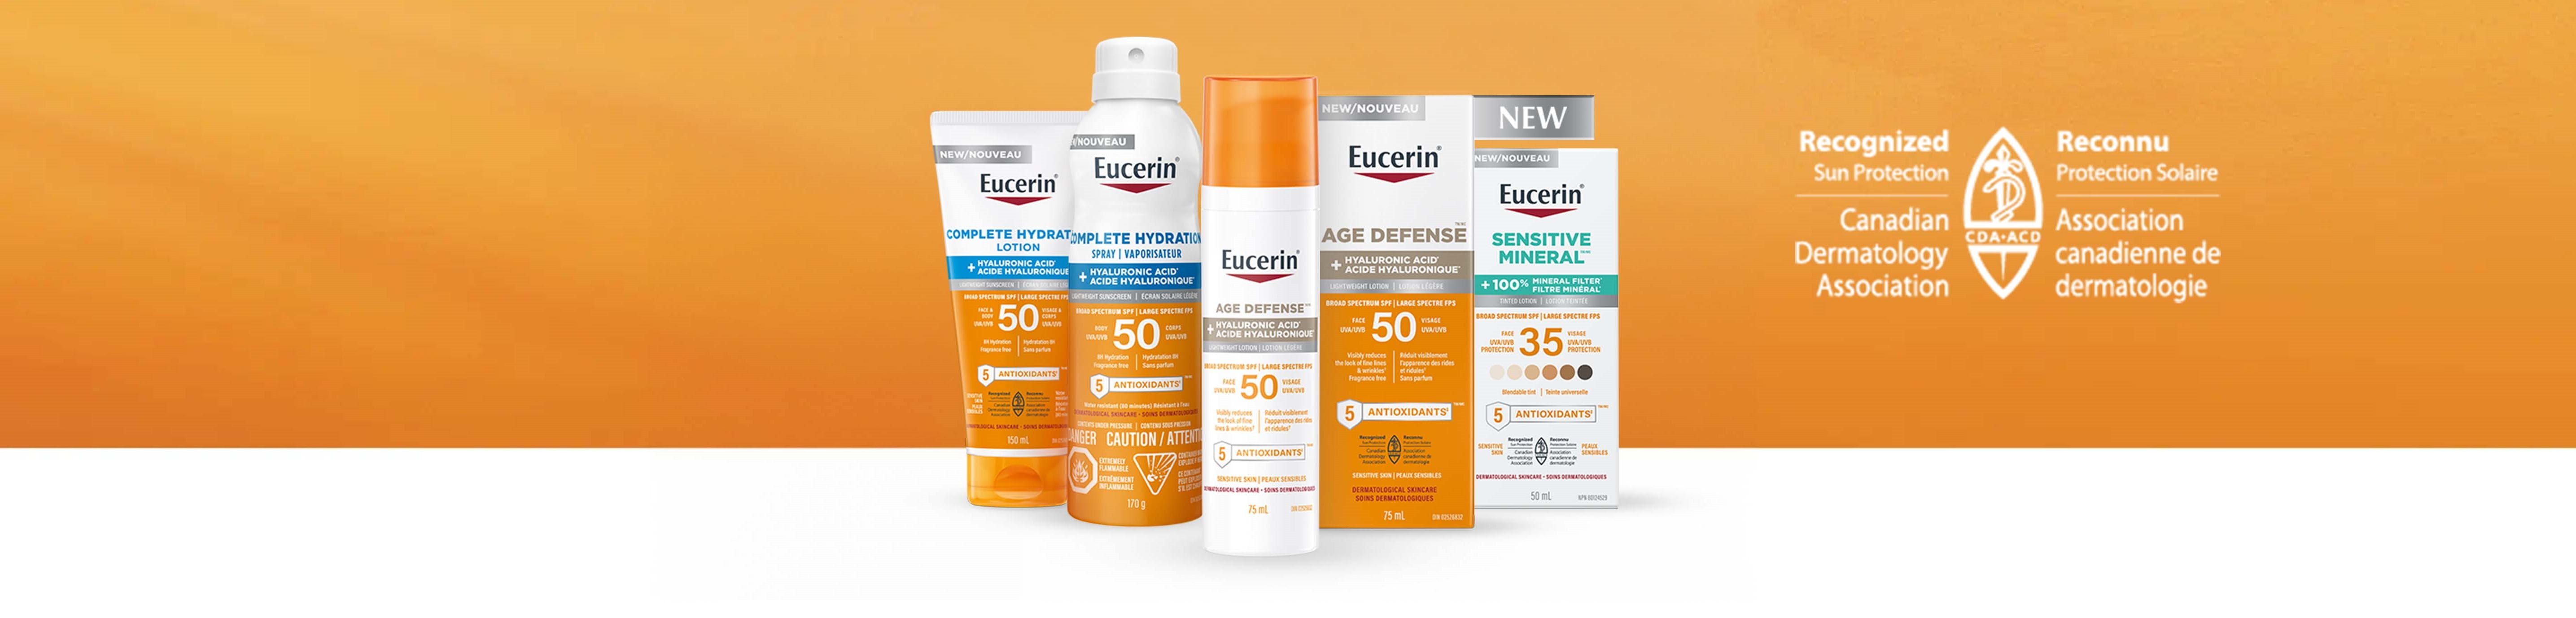 A view of several Eucerin Sun care products with the text "Go Beyond Sun Protection" shown.